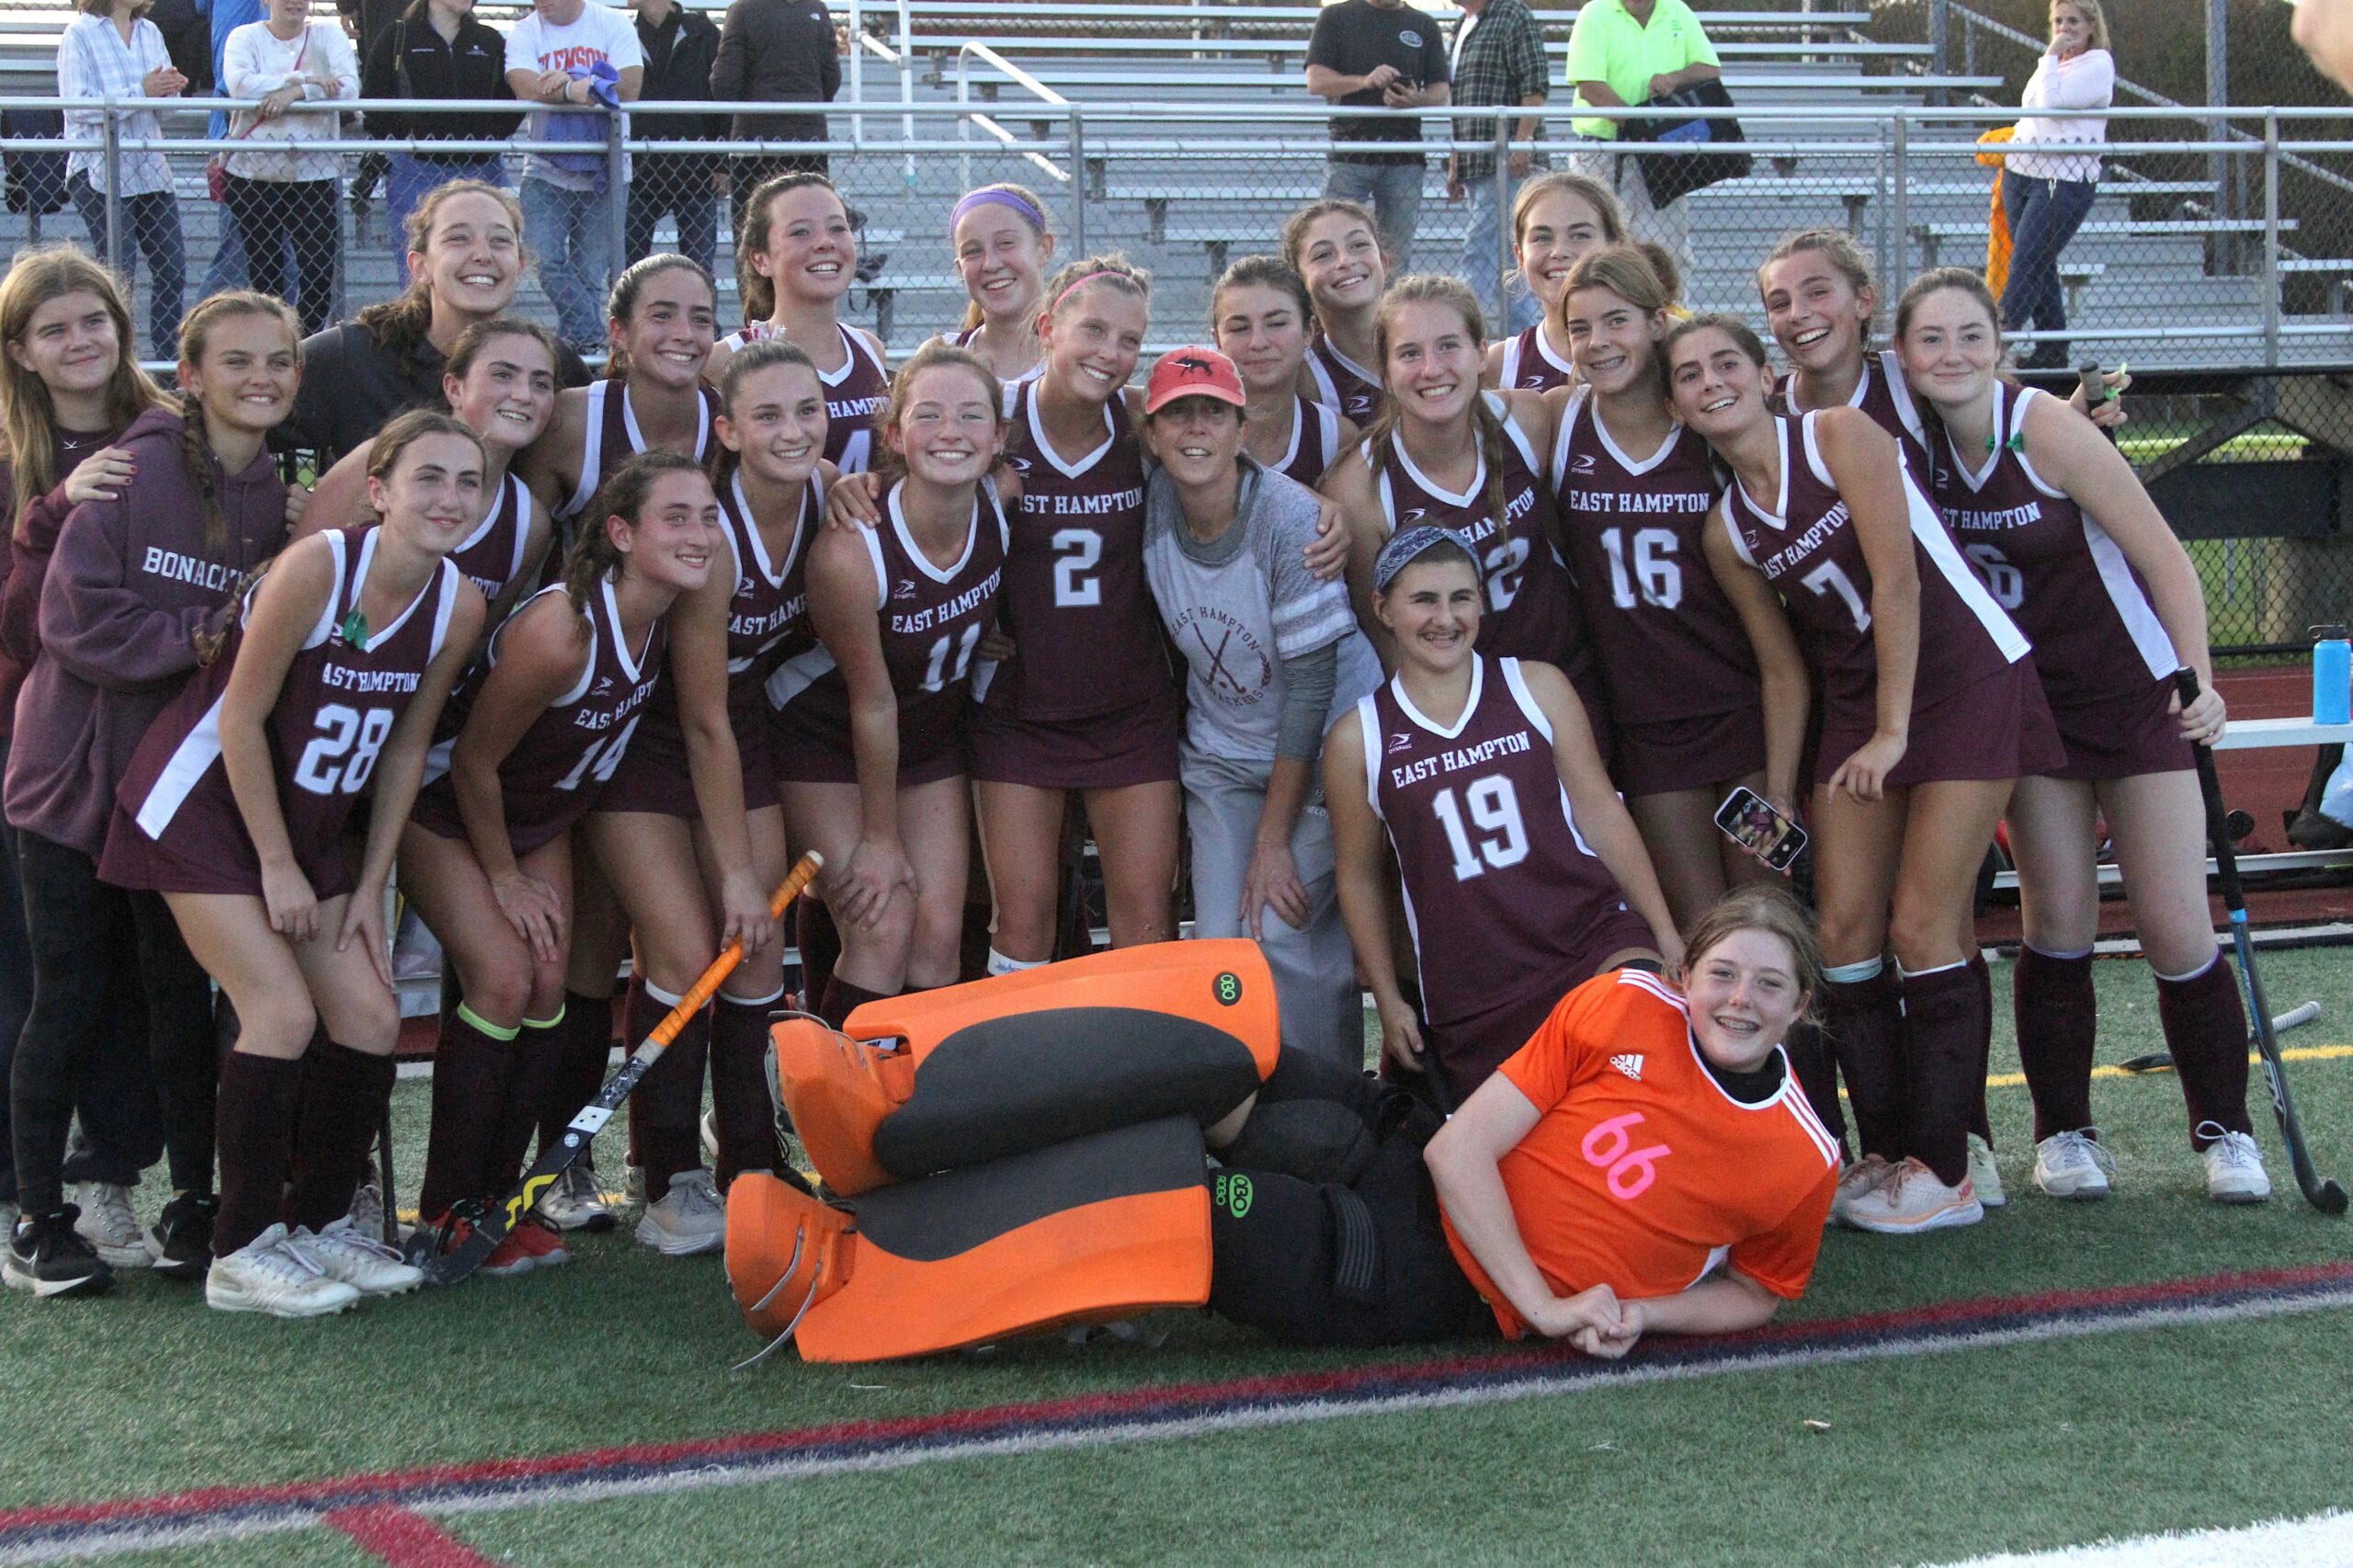 East Hampton's field hockey team advances to the Suffolk County championship for the first time since DESIRÉE KEEGAN